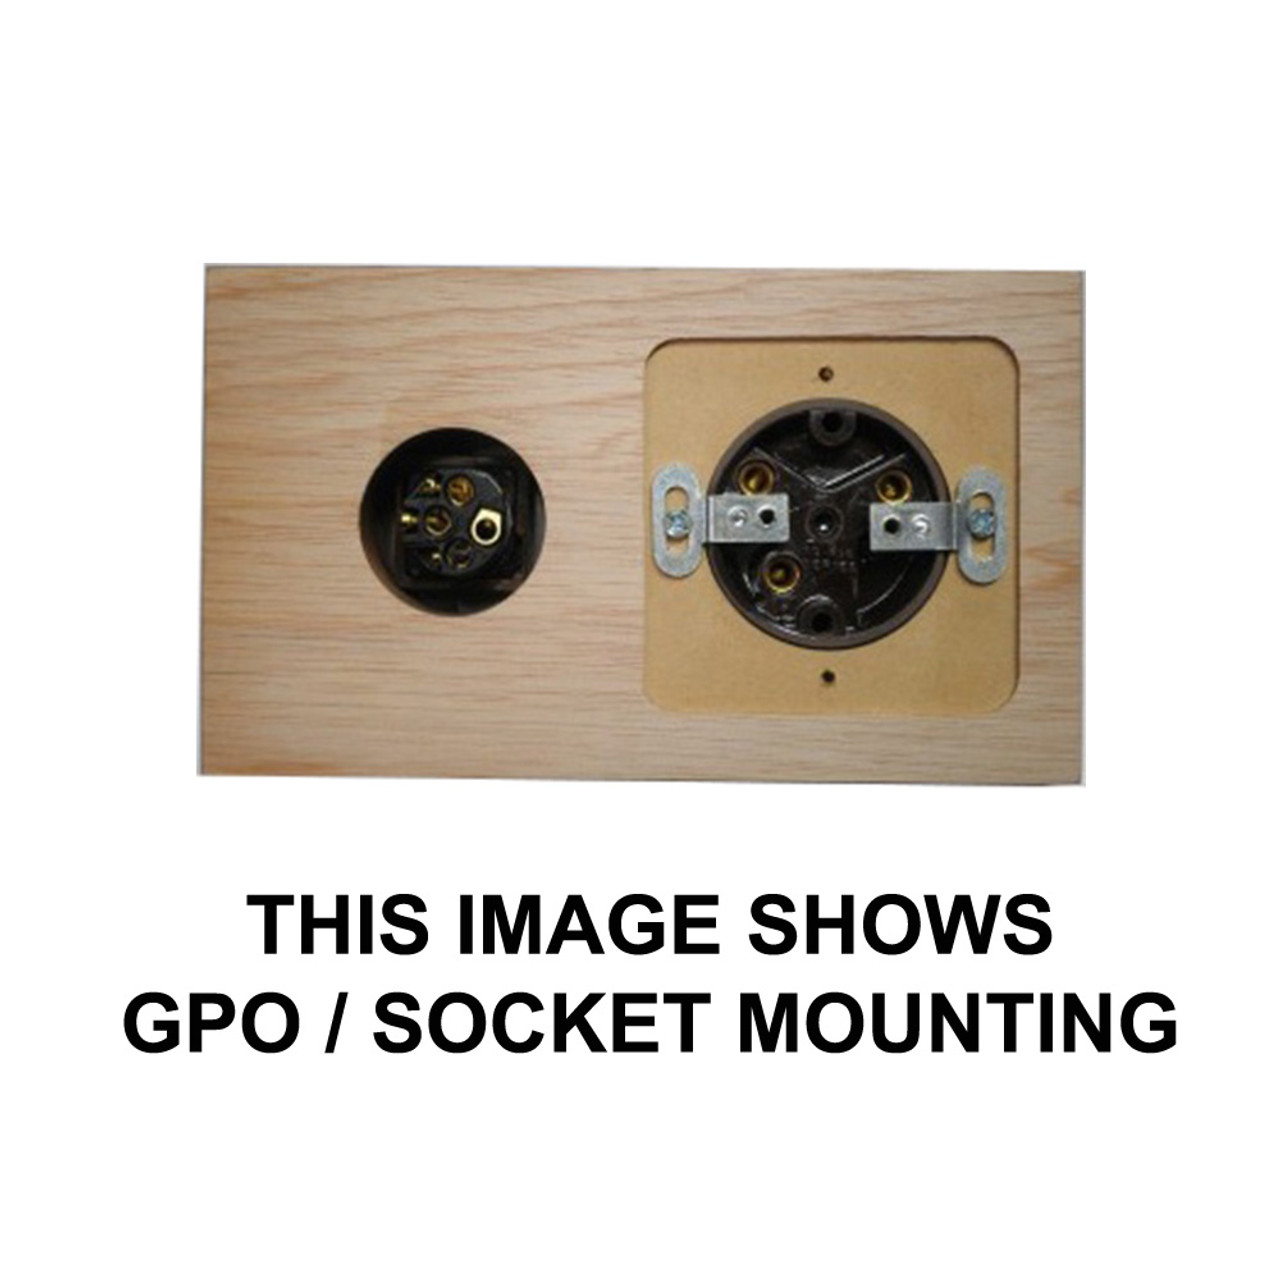 Bungalow GPO/Power Outlet Cedar Stained Mounting Block - 4 Gang Square - 15POC